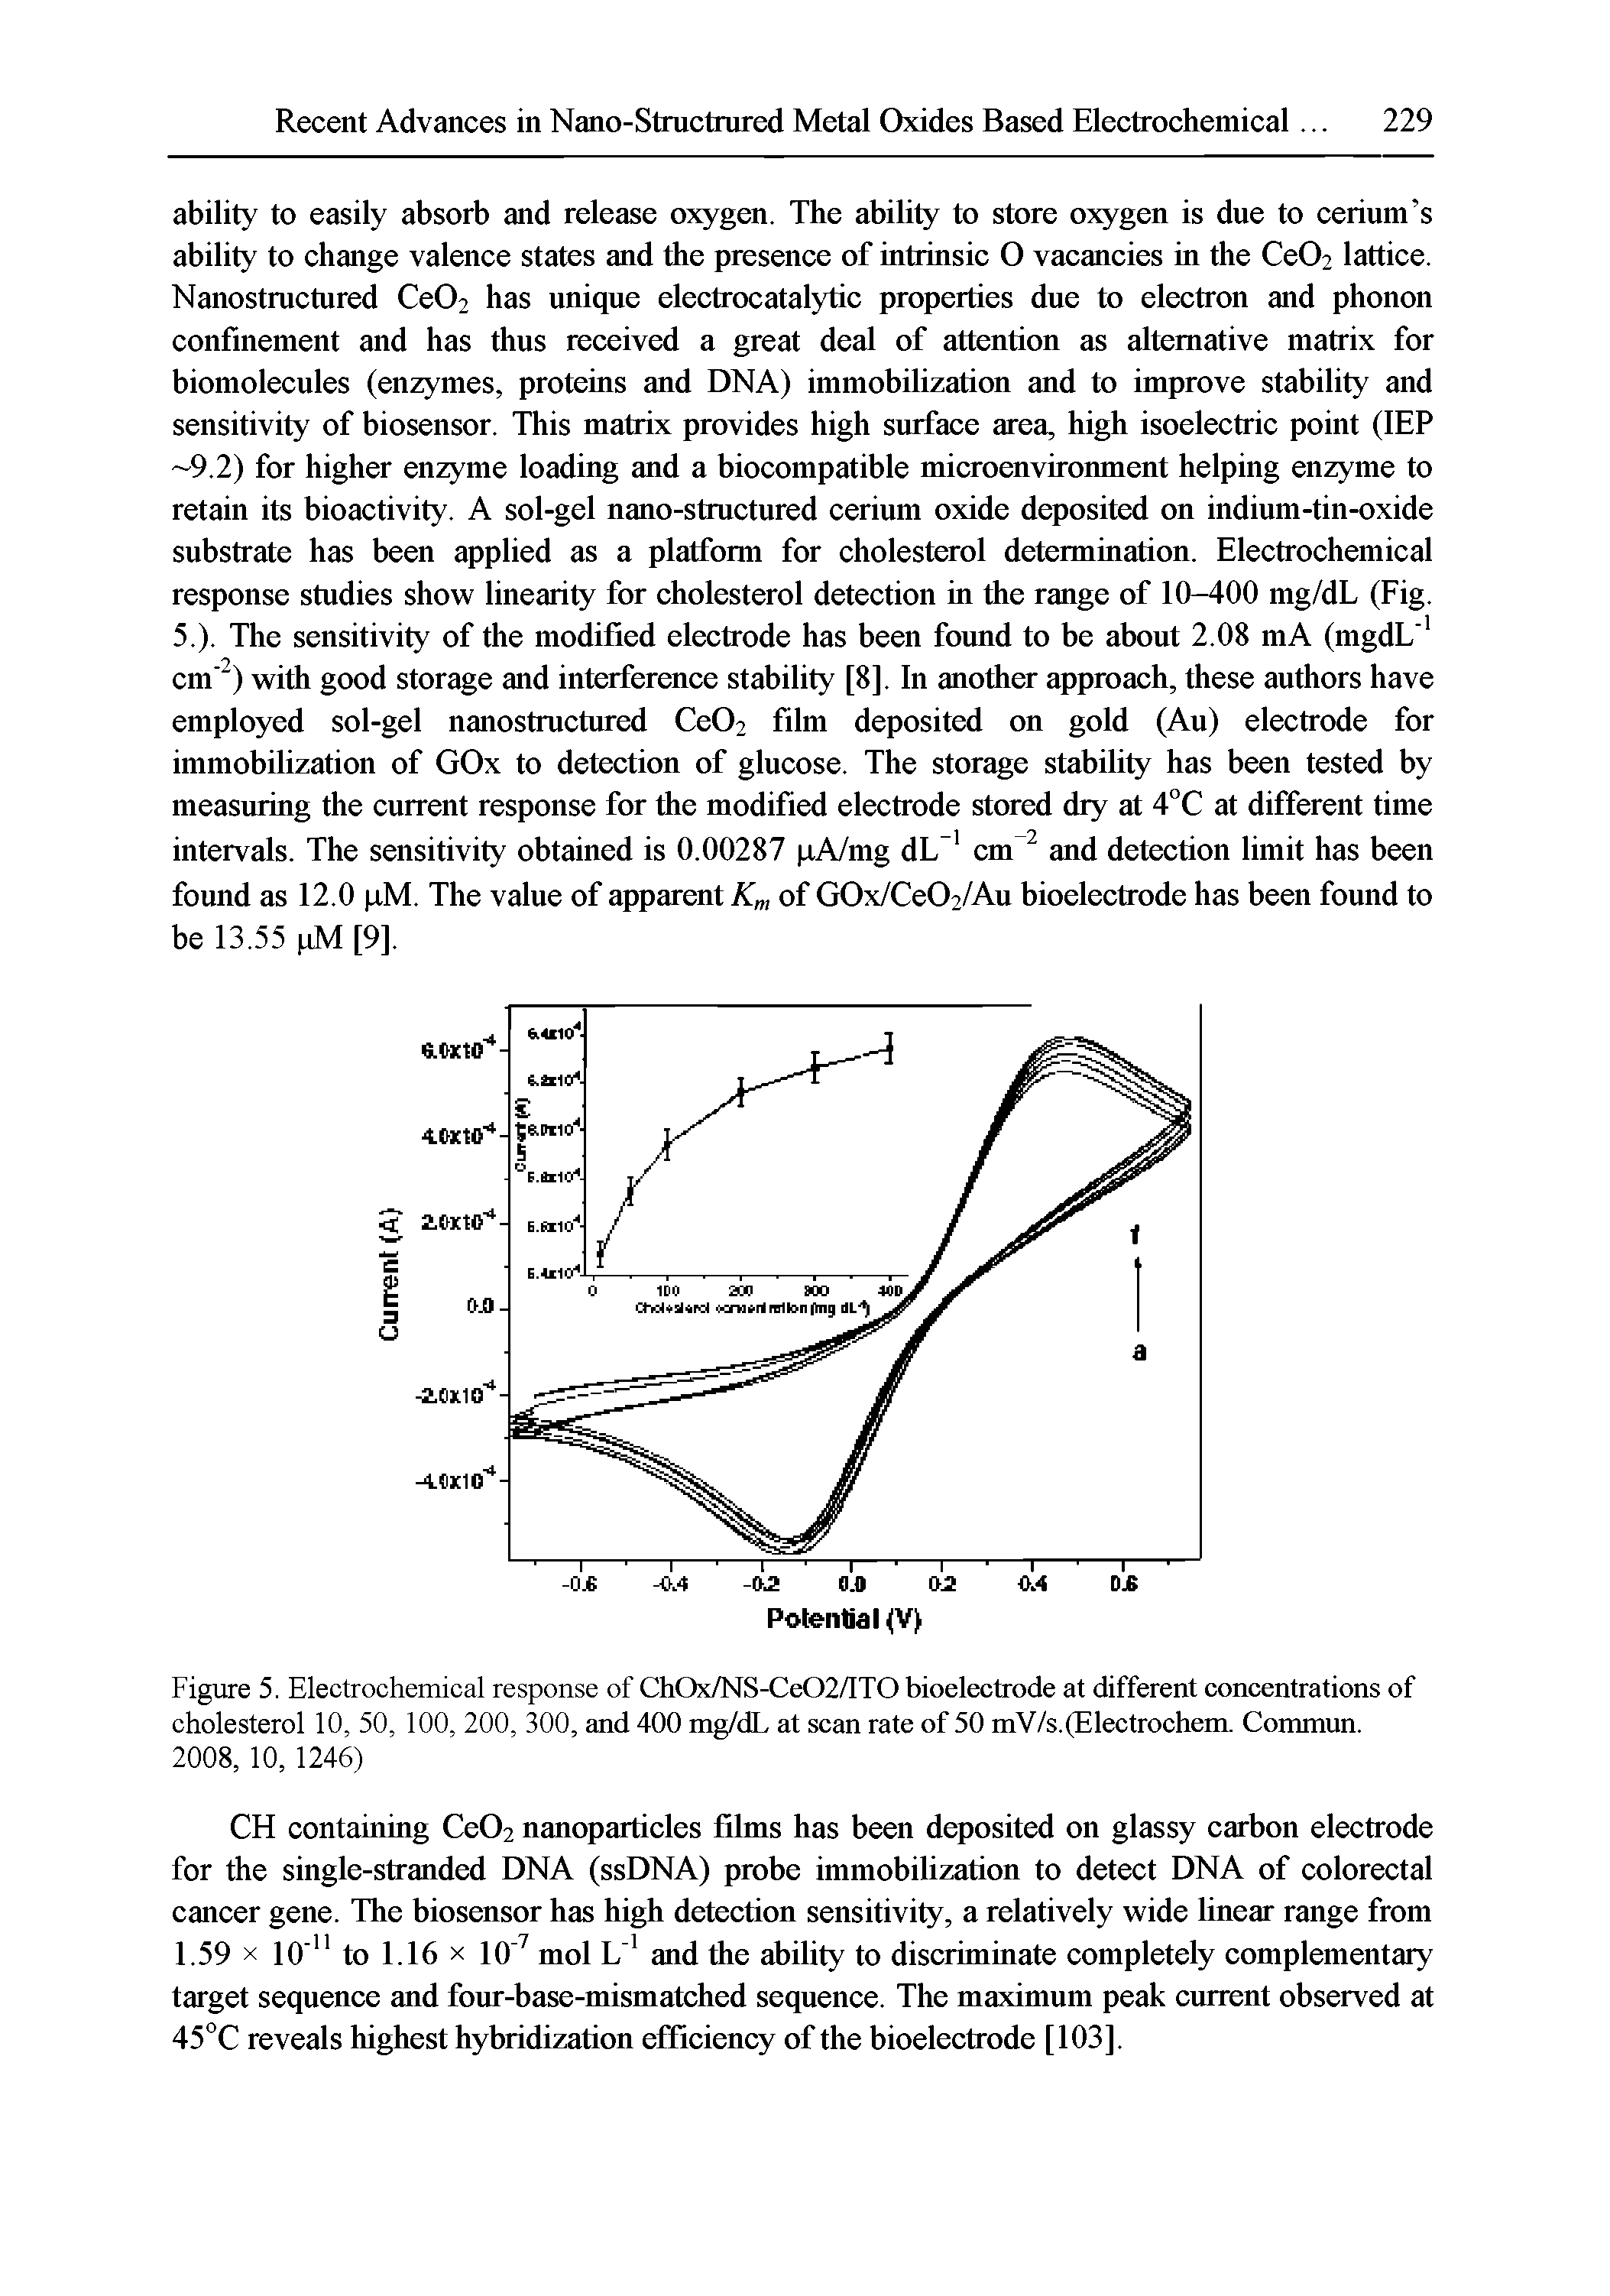 Figure 5. Electrochemical response of Ch0x/NS-Ce02/IT0 bioelectrode at different concentrations of cholesterol 10, 50, 100, 200, 300, and 400 mg/dL at scan rate of 50 mV/s.(Electrochem. Commun.